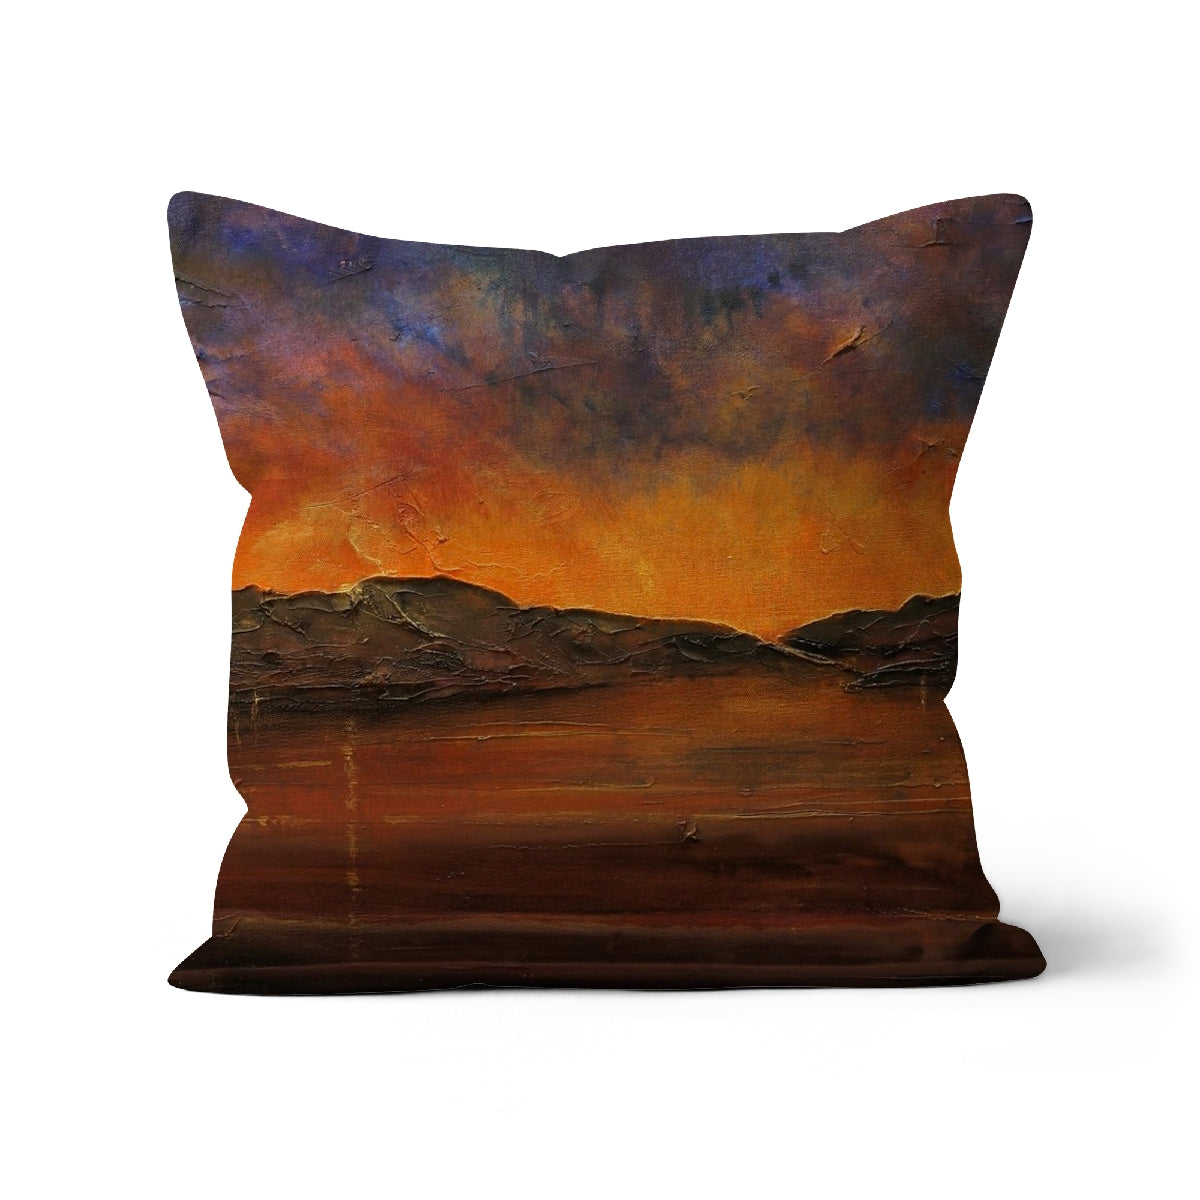 A Brooding Clyde Dusk Art Gifts Cushion-Cushions-River Clyde Art Gallery-Linen-24"x24"-Paintings, Prints, Homeware, Art Gifts From Scotland By Scottish Artist Kevin Hunter